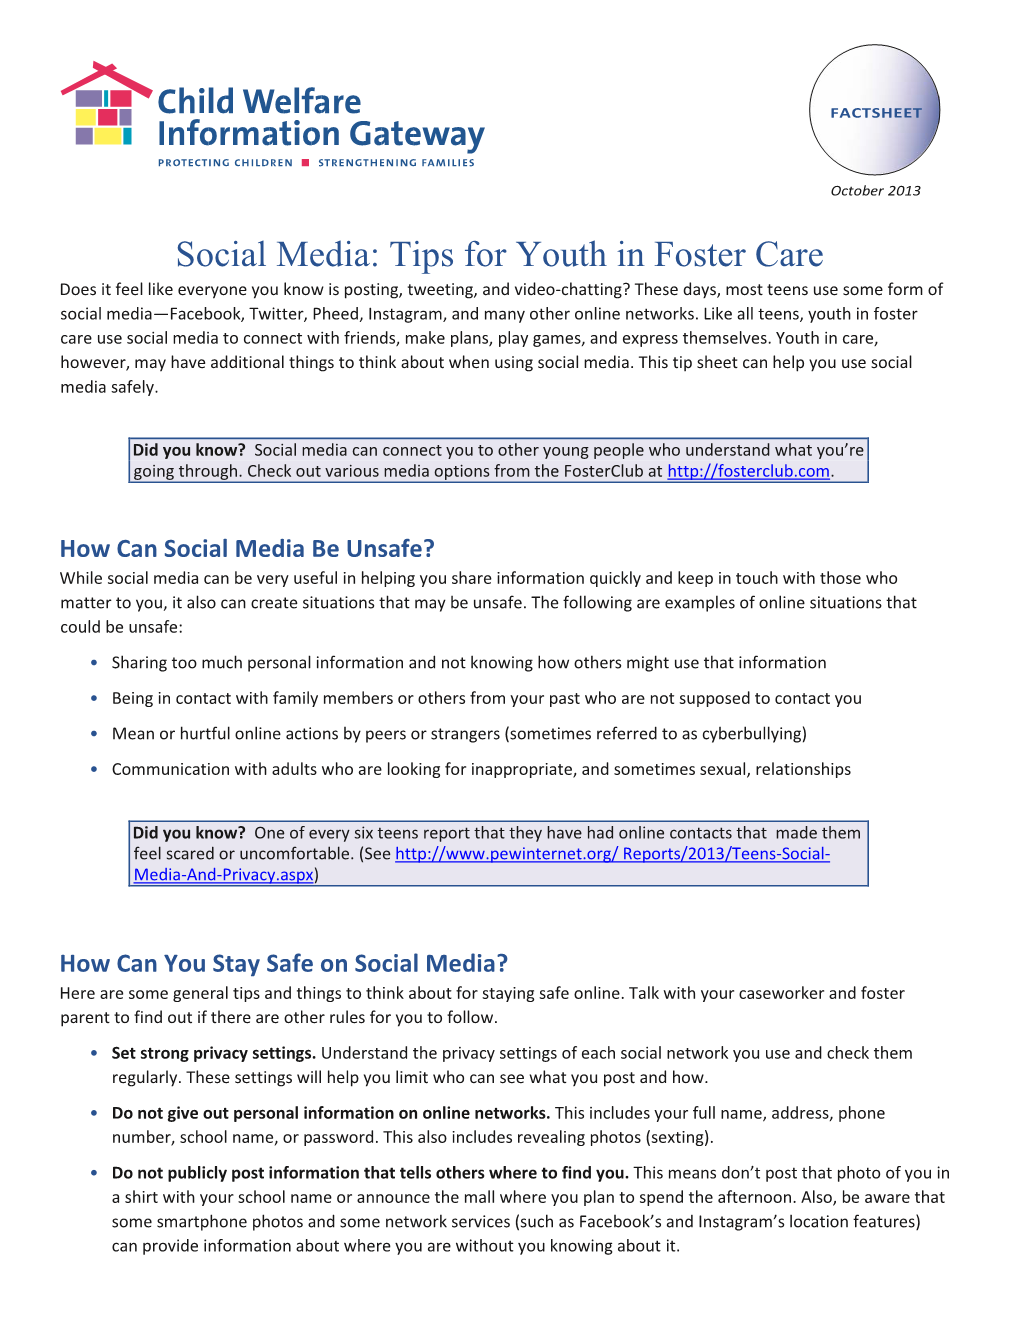 Social Media-Tips for Foster Youth